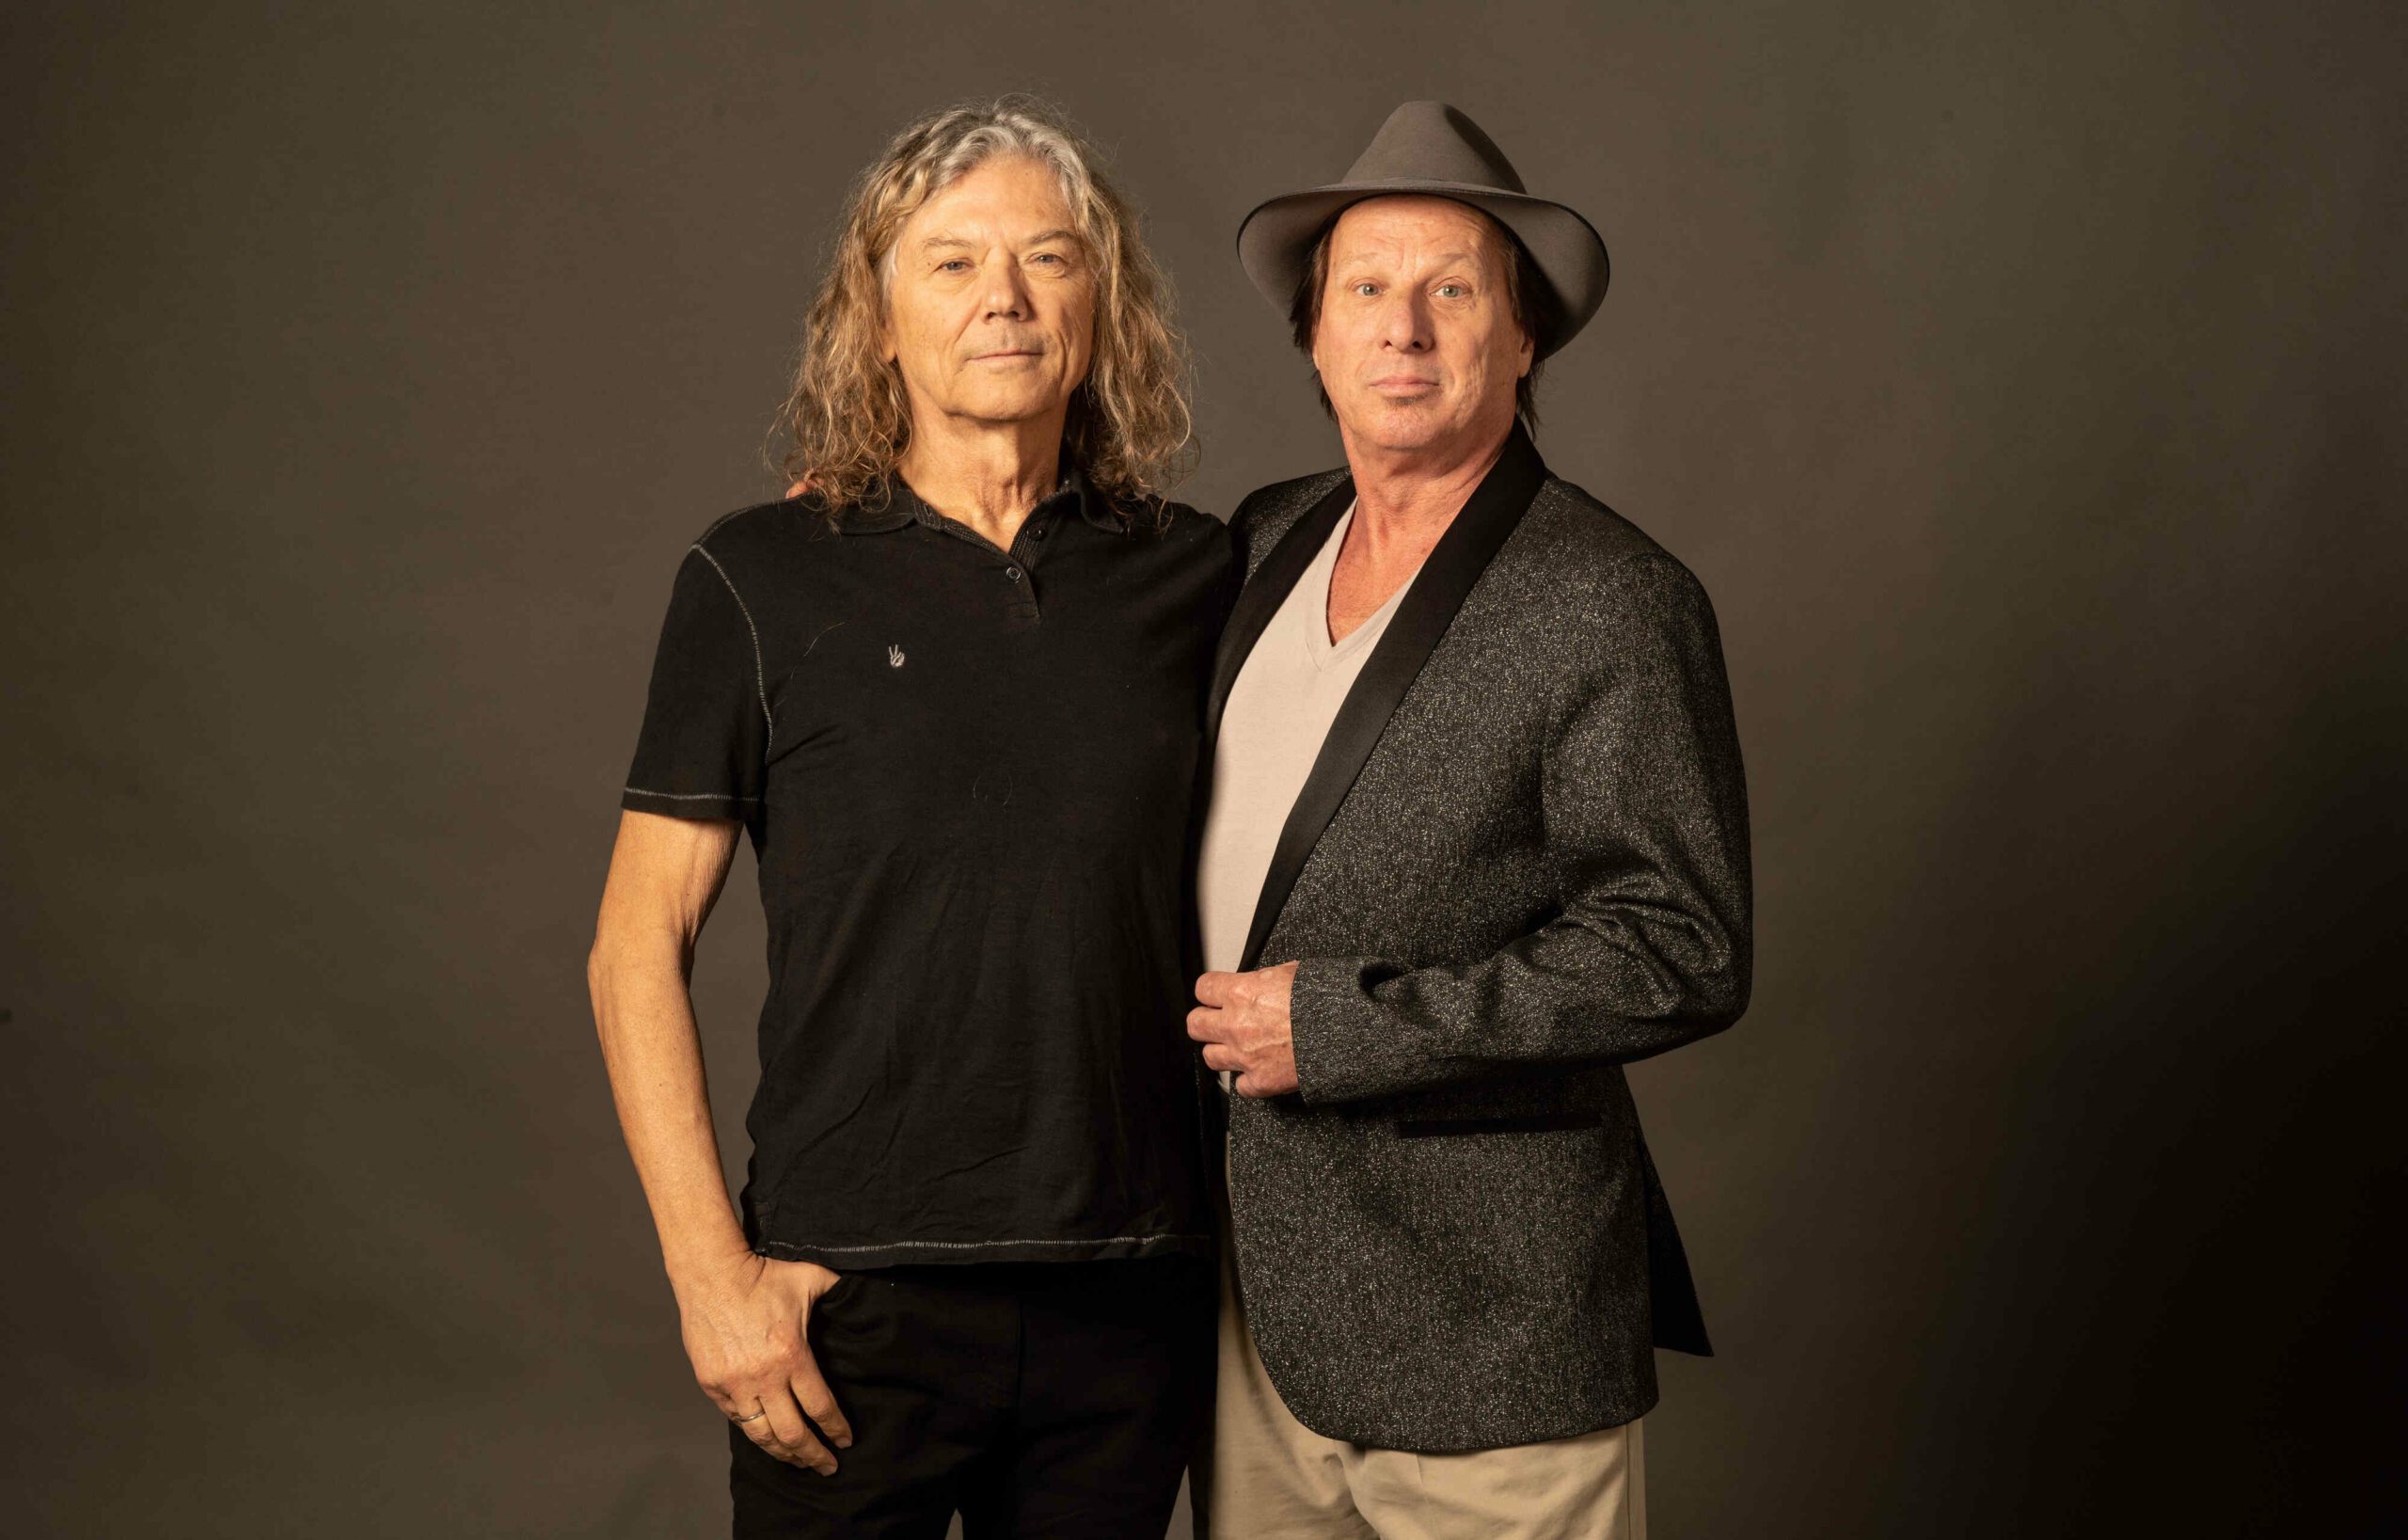 Musicians Jerry Harrison and Adrian Belew standing together